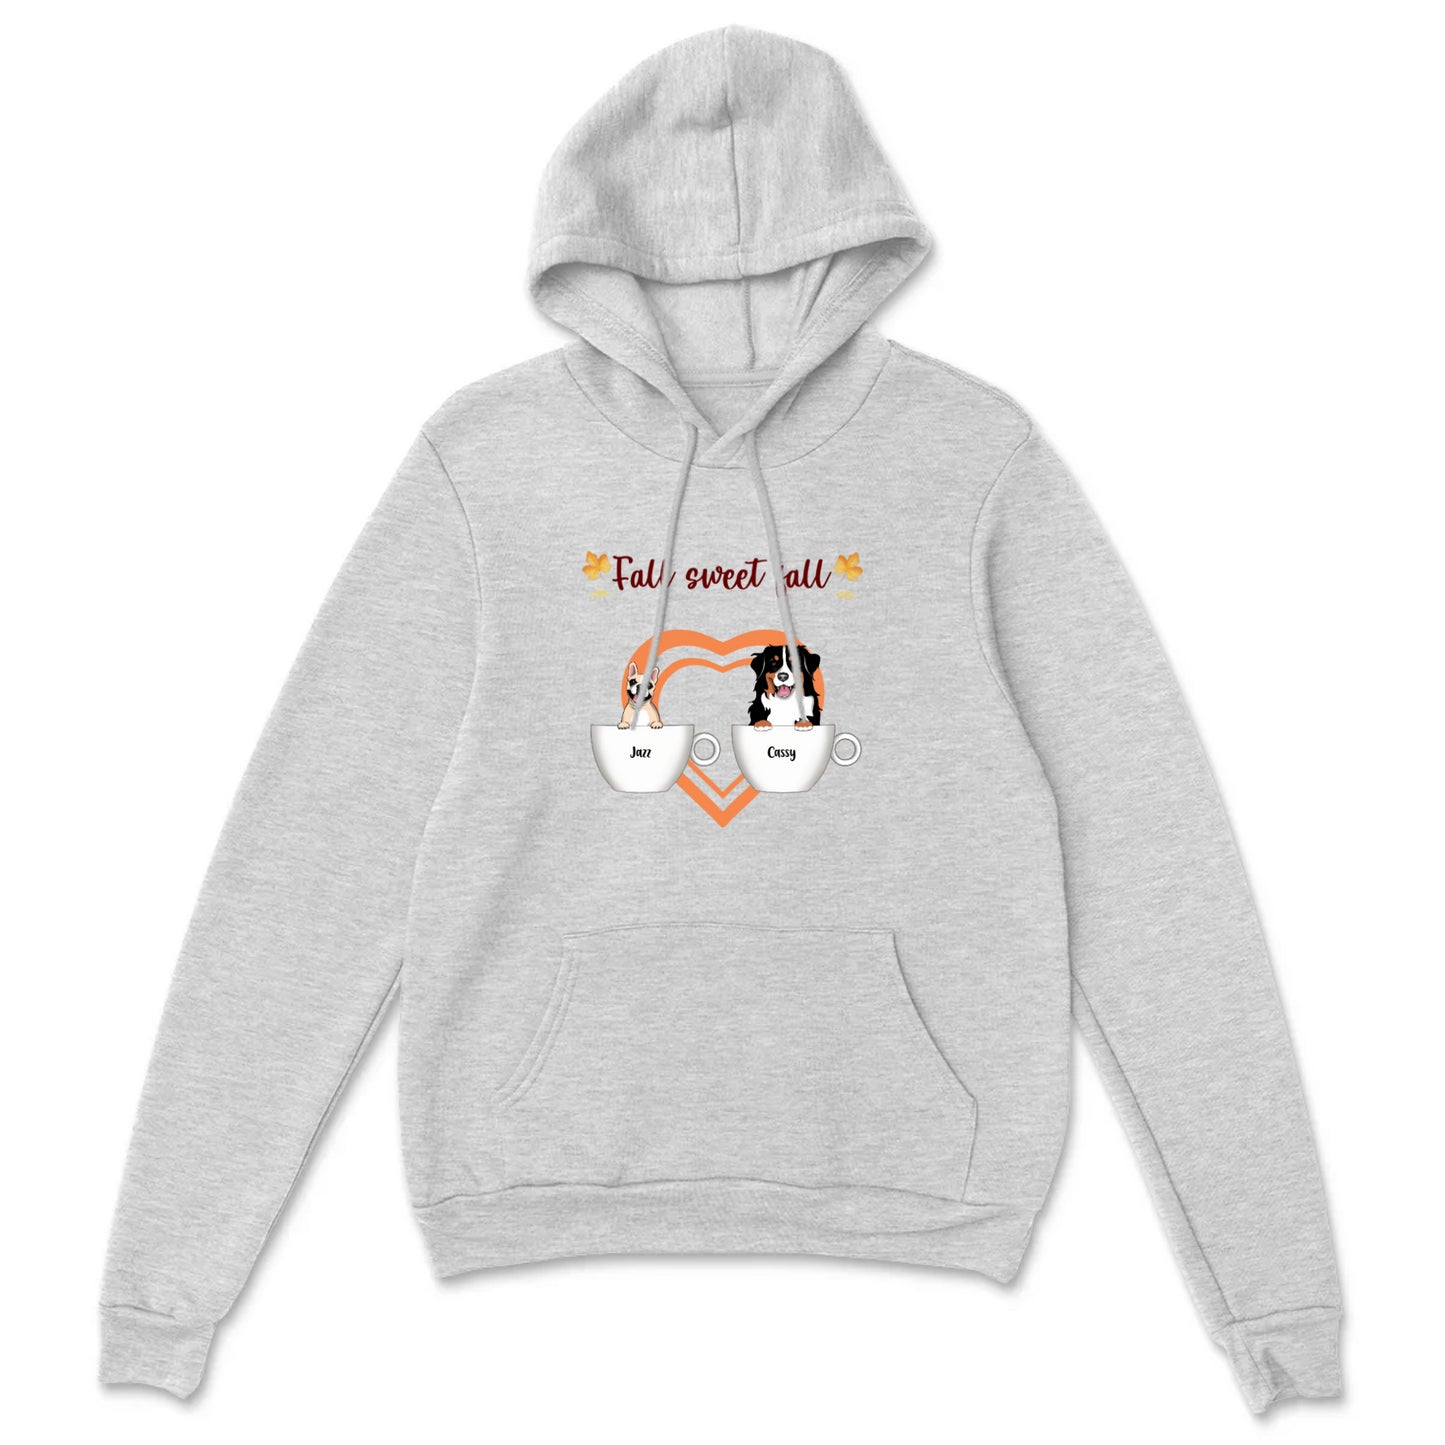 Fall Sweet Fall Pullover Hoodie